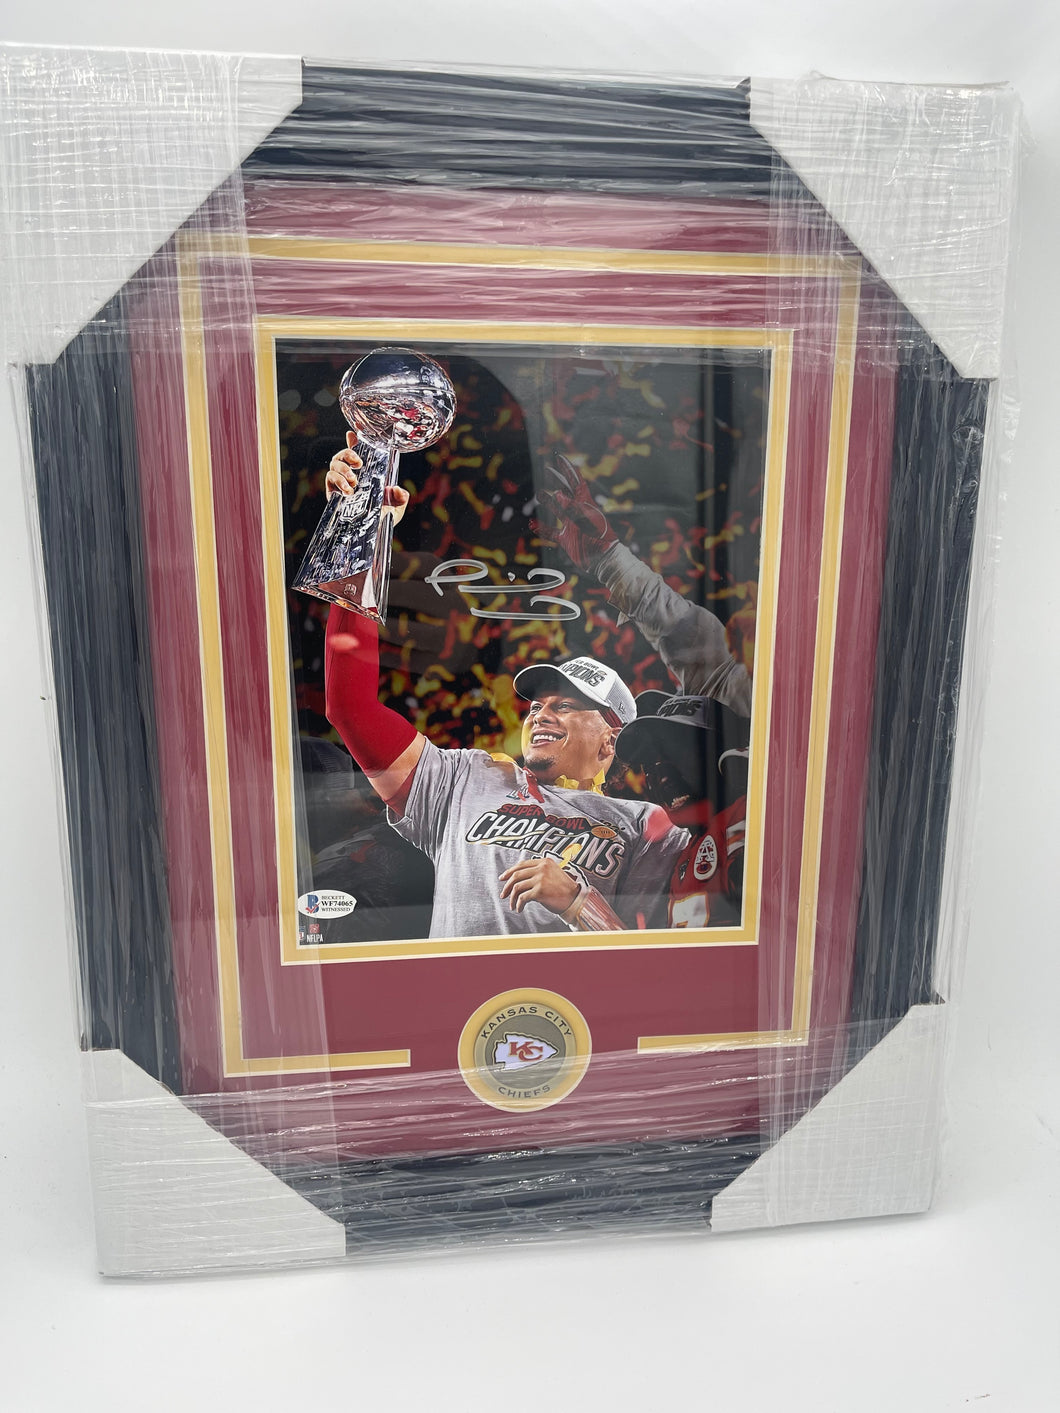 Patrick Mahomes signed and framed 8x10 by photo